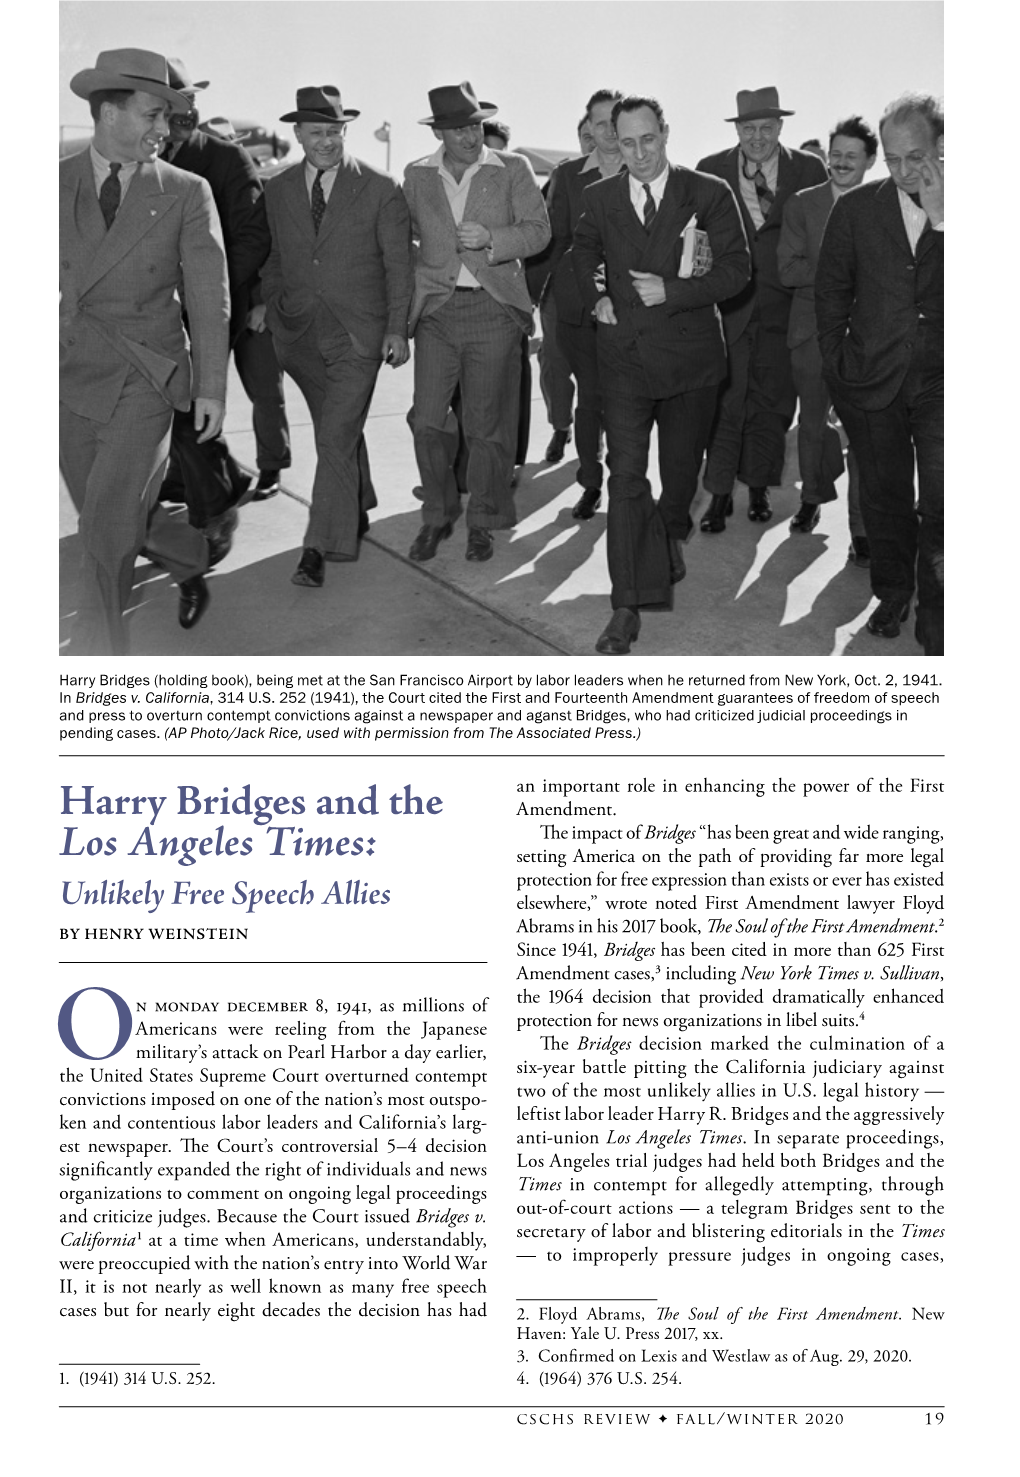 Harry Bridges and the Los Angeles Times